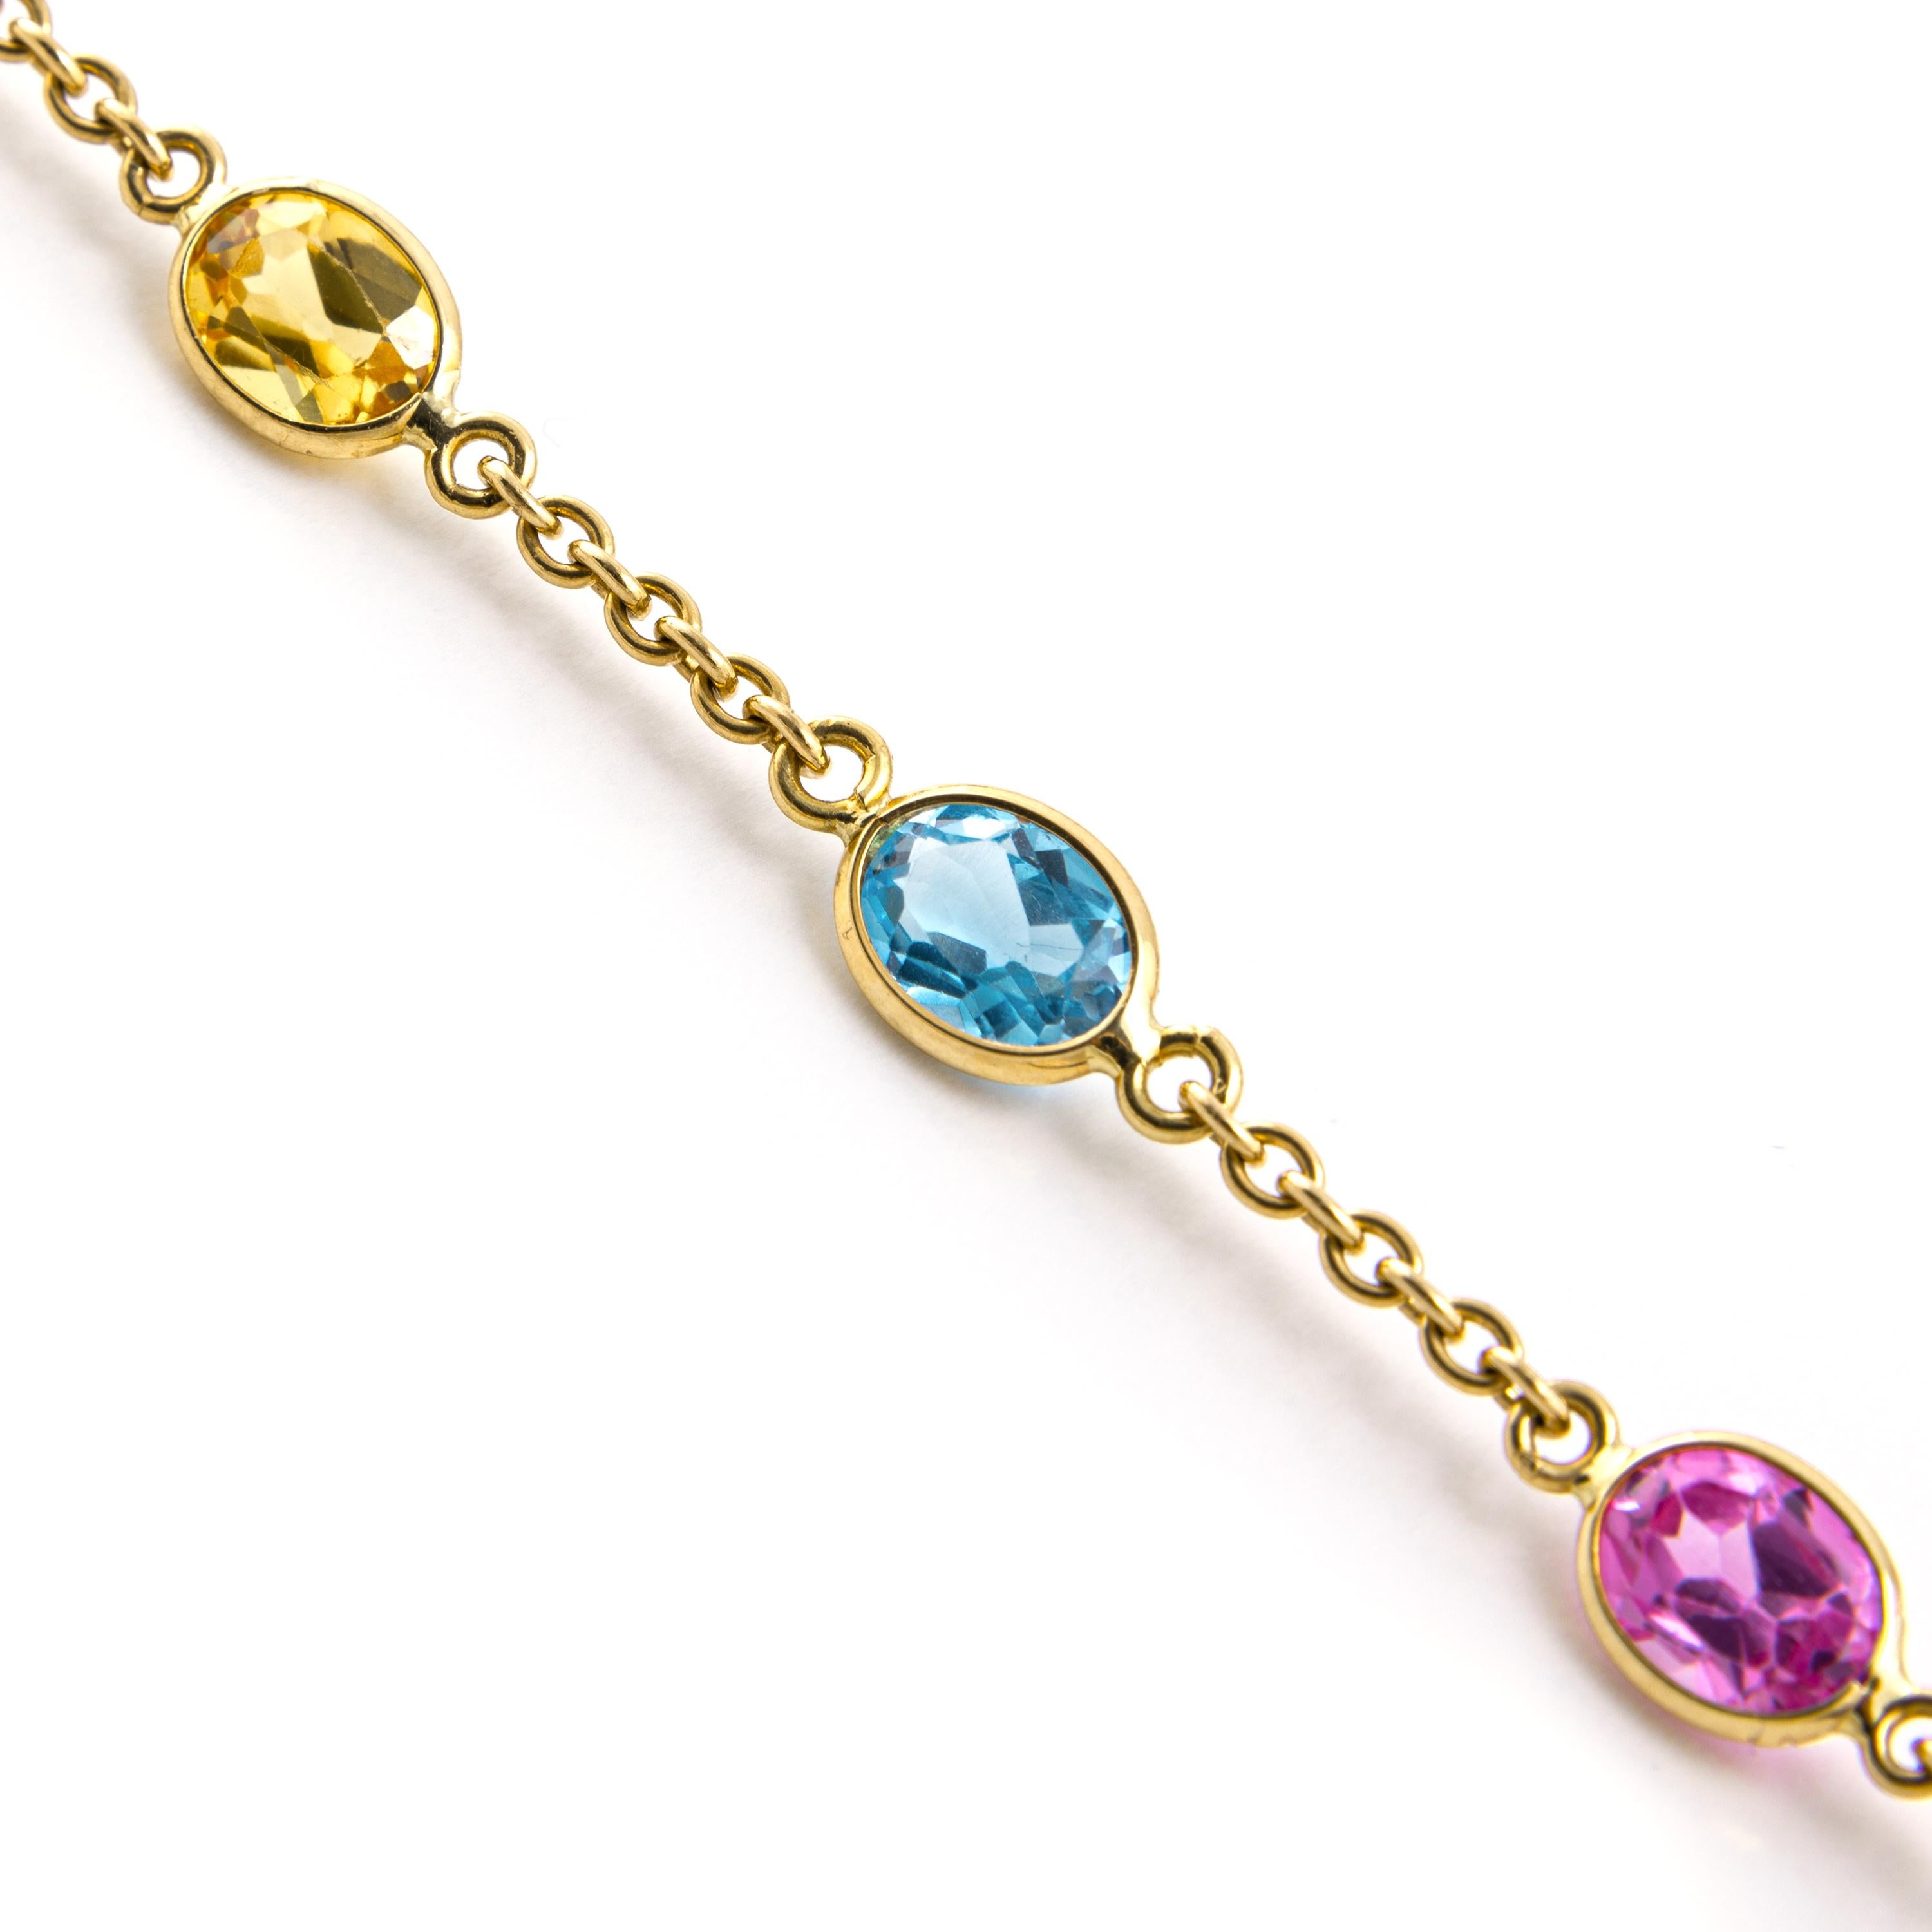 Colored GemStones yellow gold 18k chain Necklace.
Colored Sapphire, Aquamarine and Spinel.
Former collection of a French Lady.
Length: 16.53 inches (42.00 centimeters).
Total weight: 13.69 grams.

